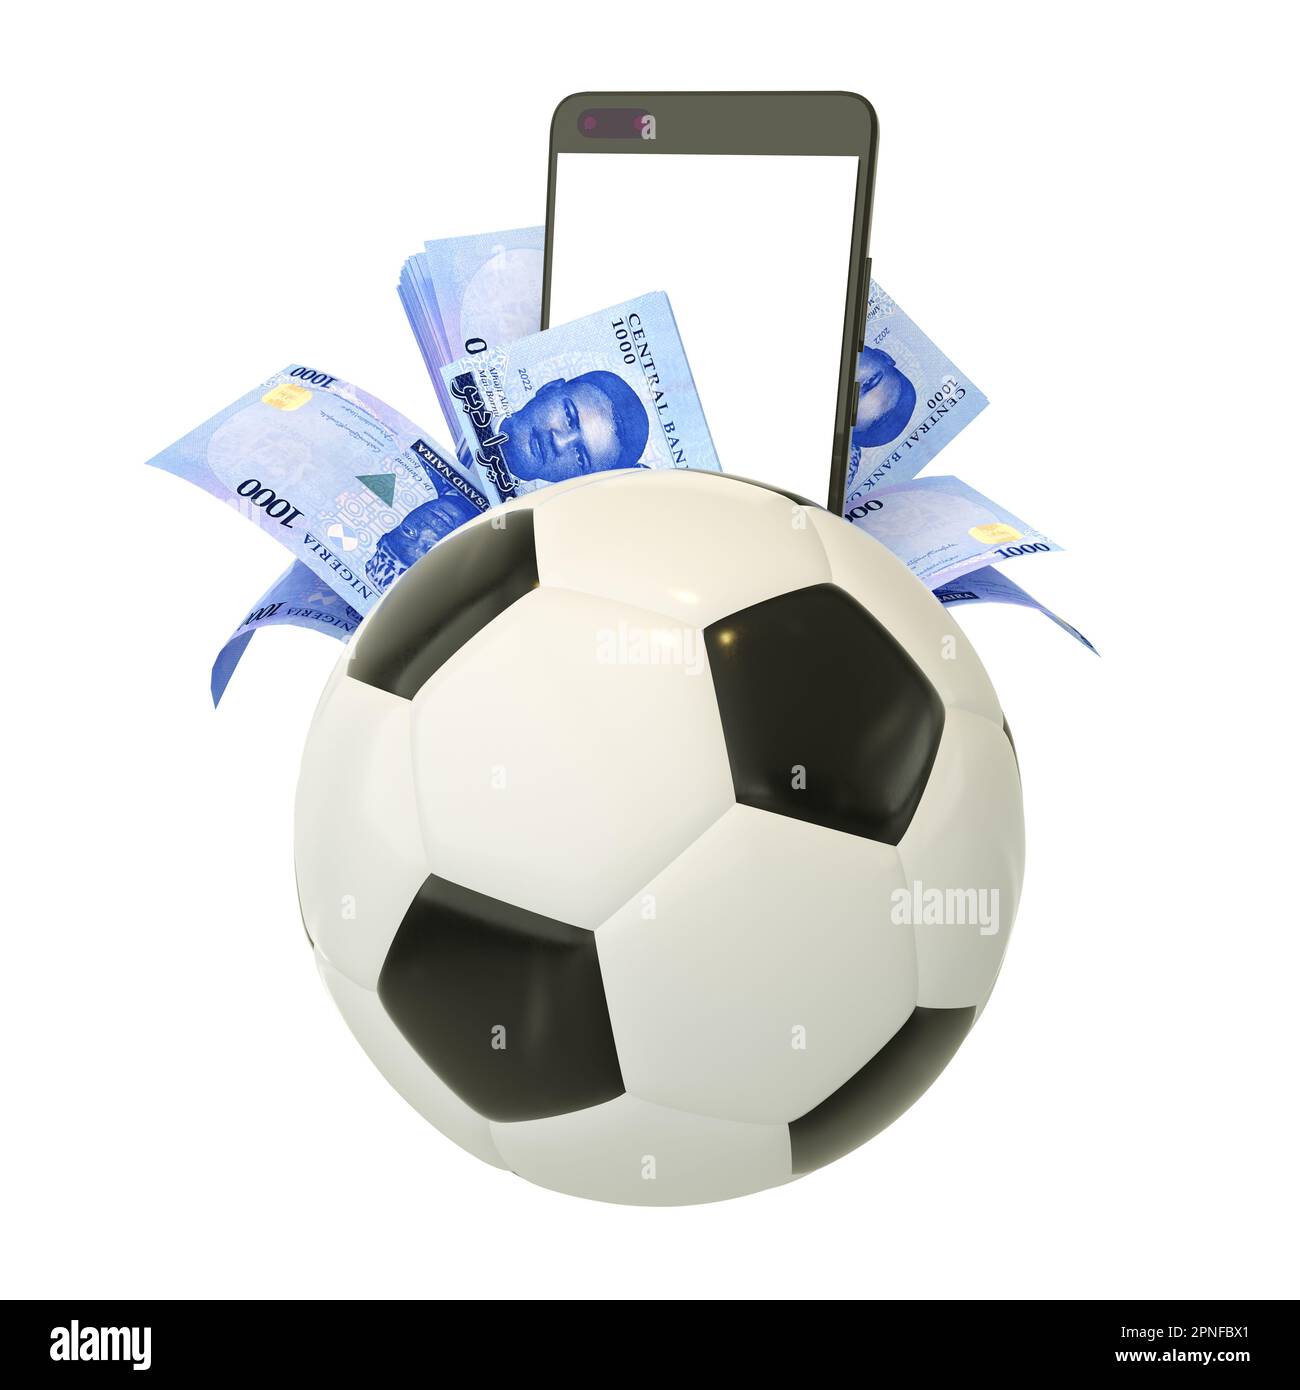 Socccer Concept Sports Betting Football Design Bookmaker Download